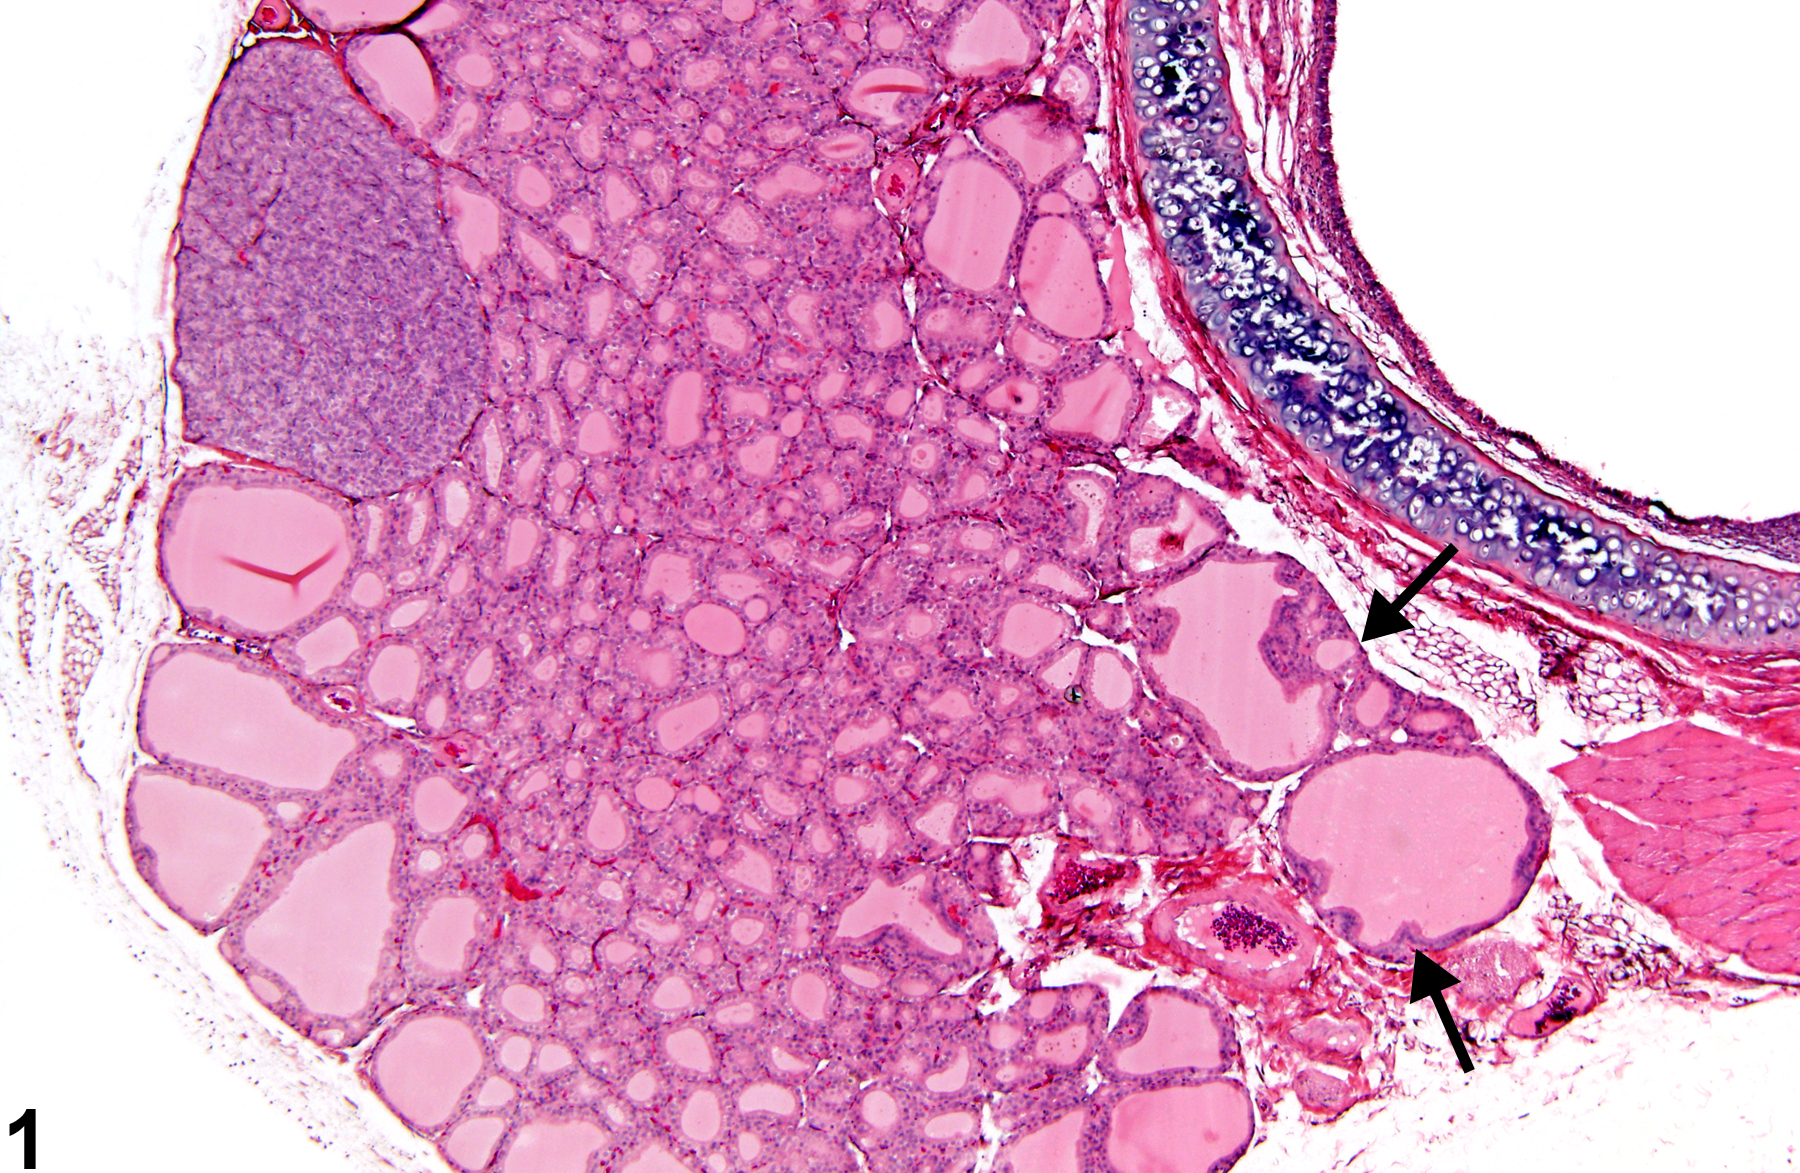 Image of follicular cell hypertrophy in the thyroid gland from a male F344/N rat in a subchronic study